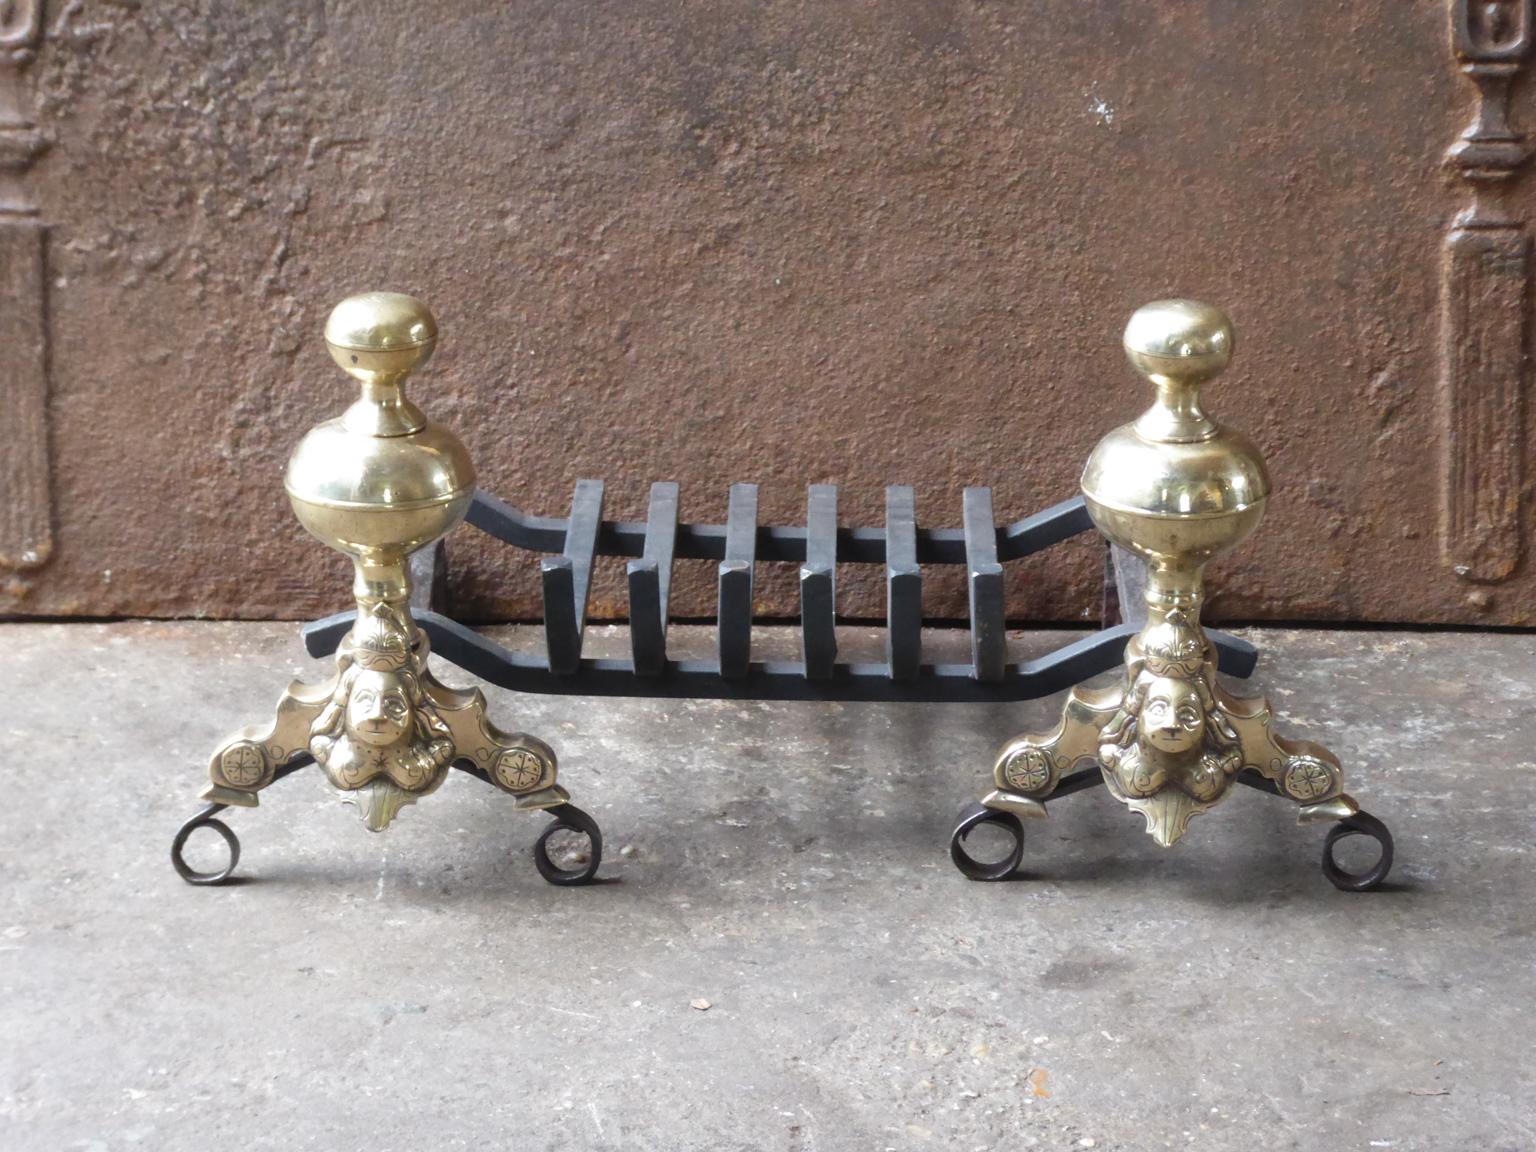 Dutch 17th - 18th century fireplace basket or fire grate from the Louis XIV period. The fireplace grate is made of wrought iron and bronze. The condition is good.



















